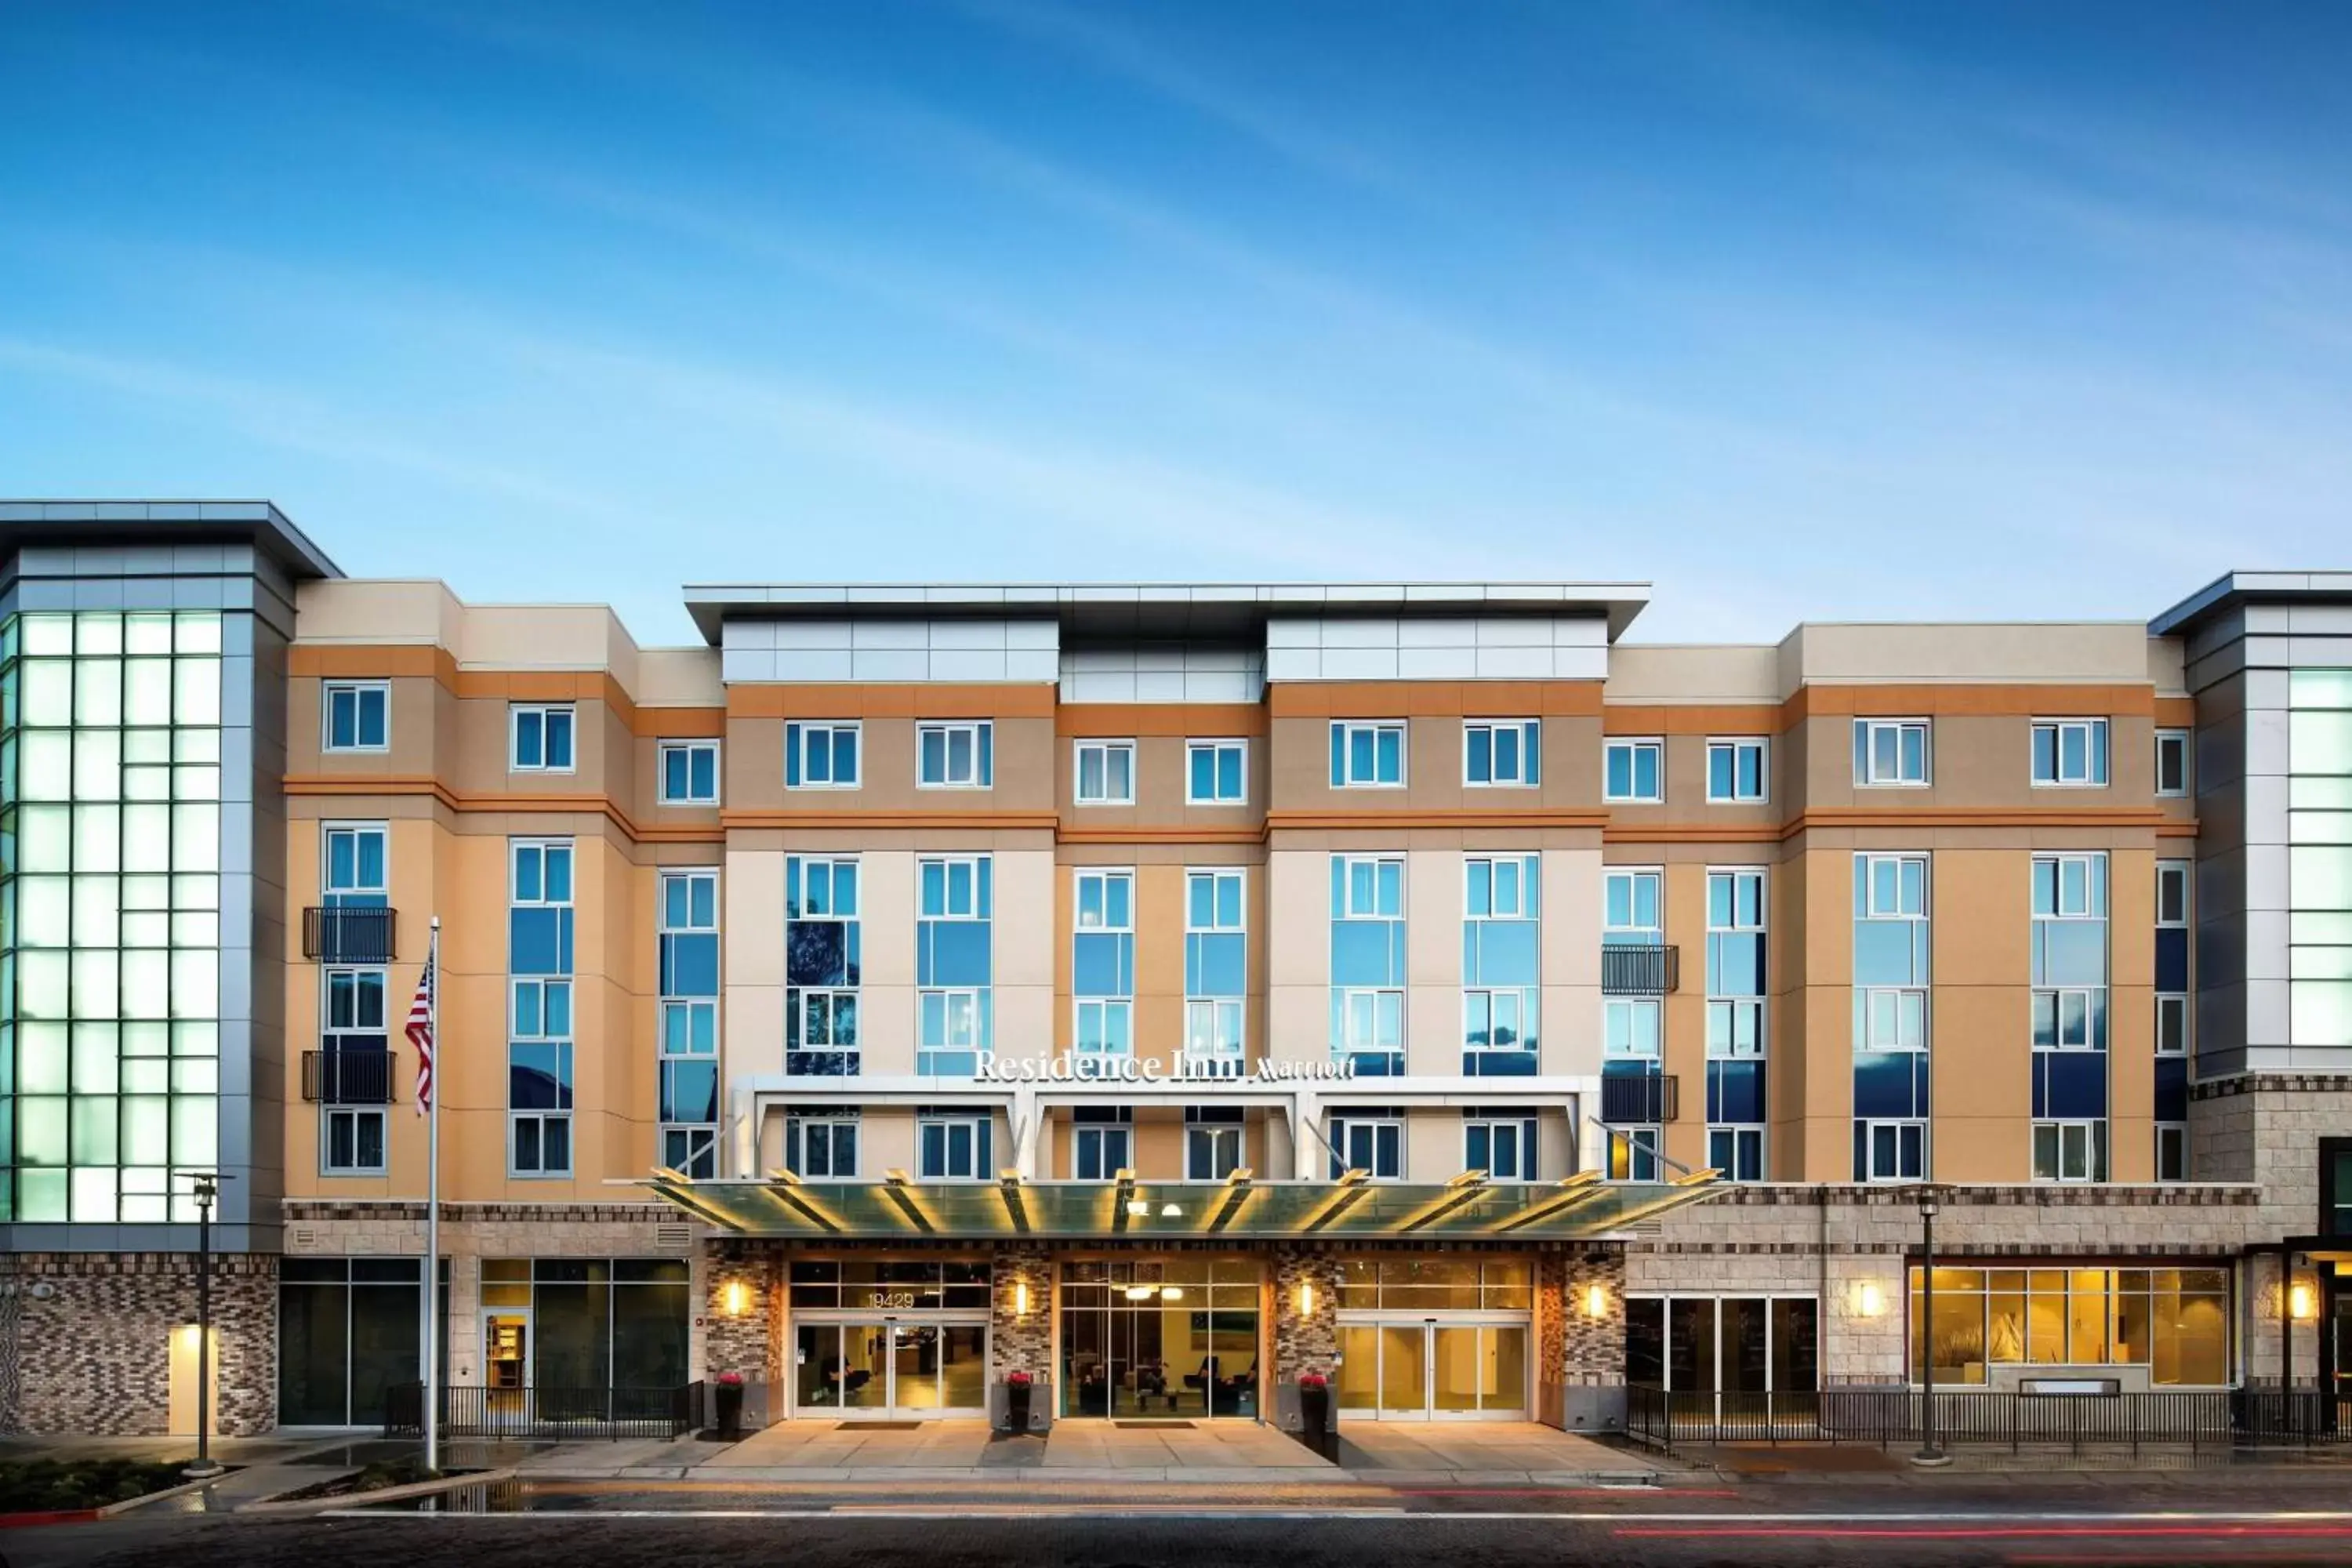 Property Building in Residence Inn by Marriott San Jose Cupertino